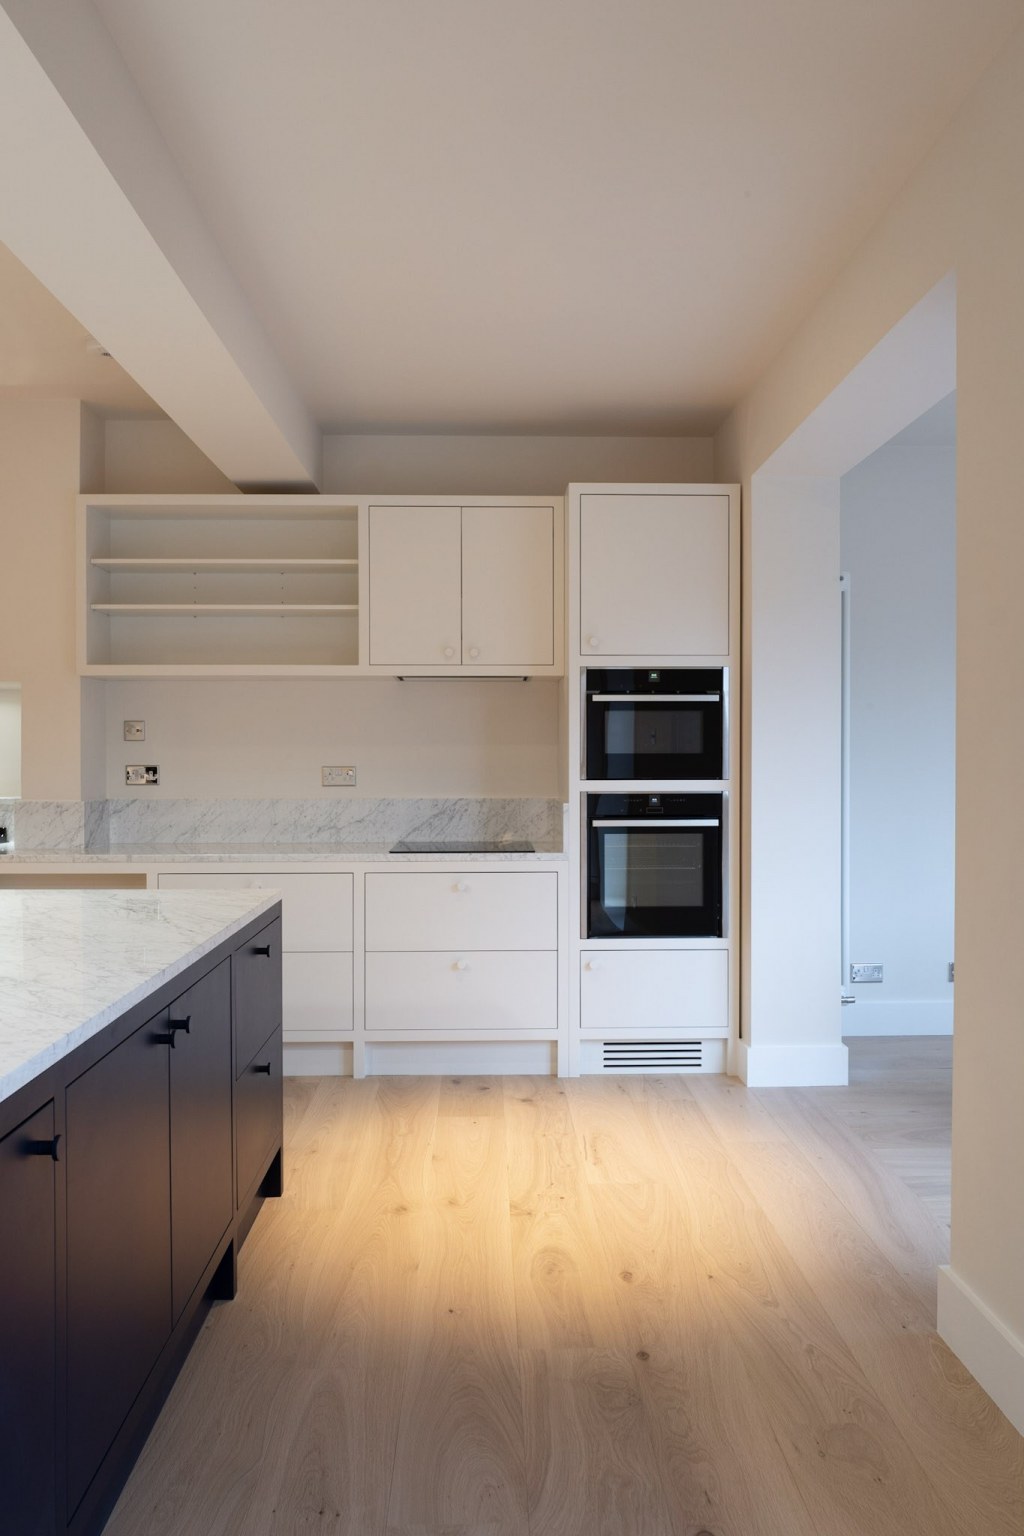 Hillcrest Road / View of bespoke kitchen joinery